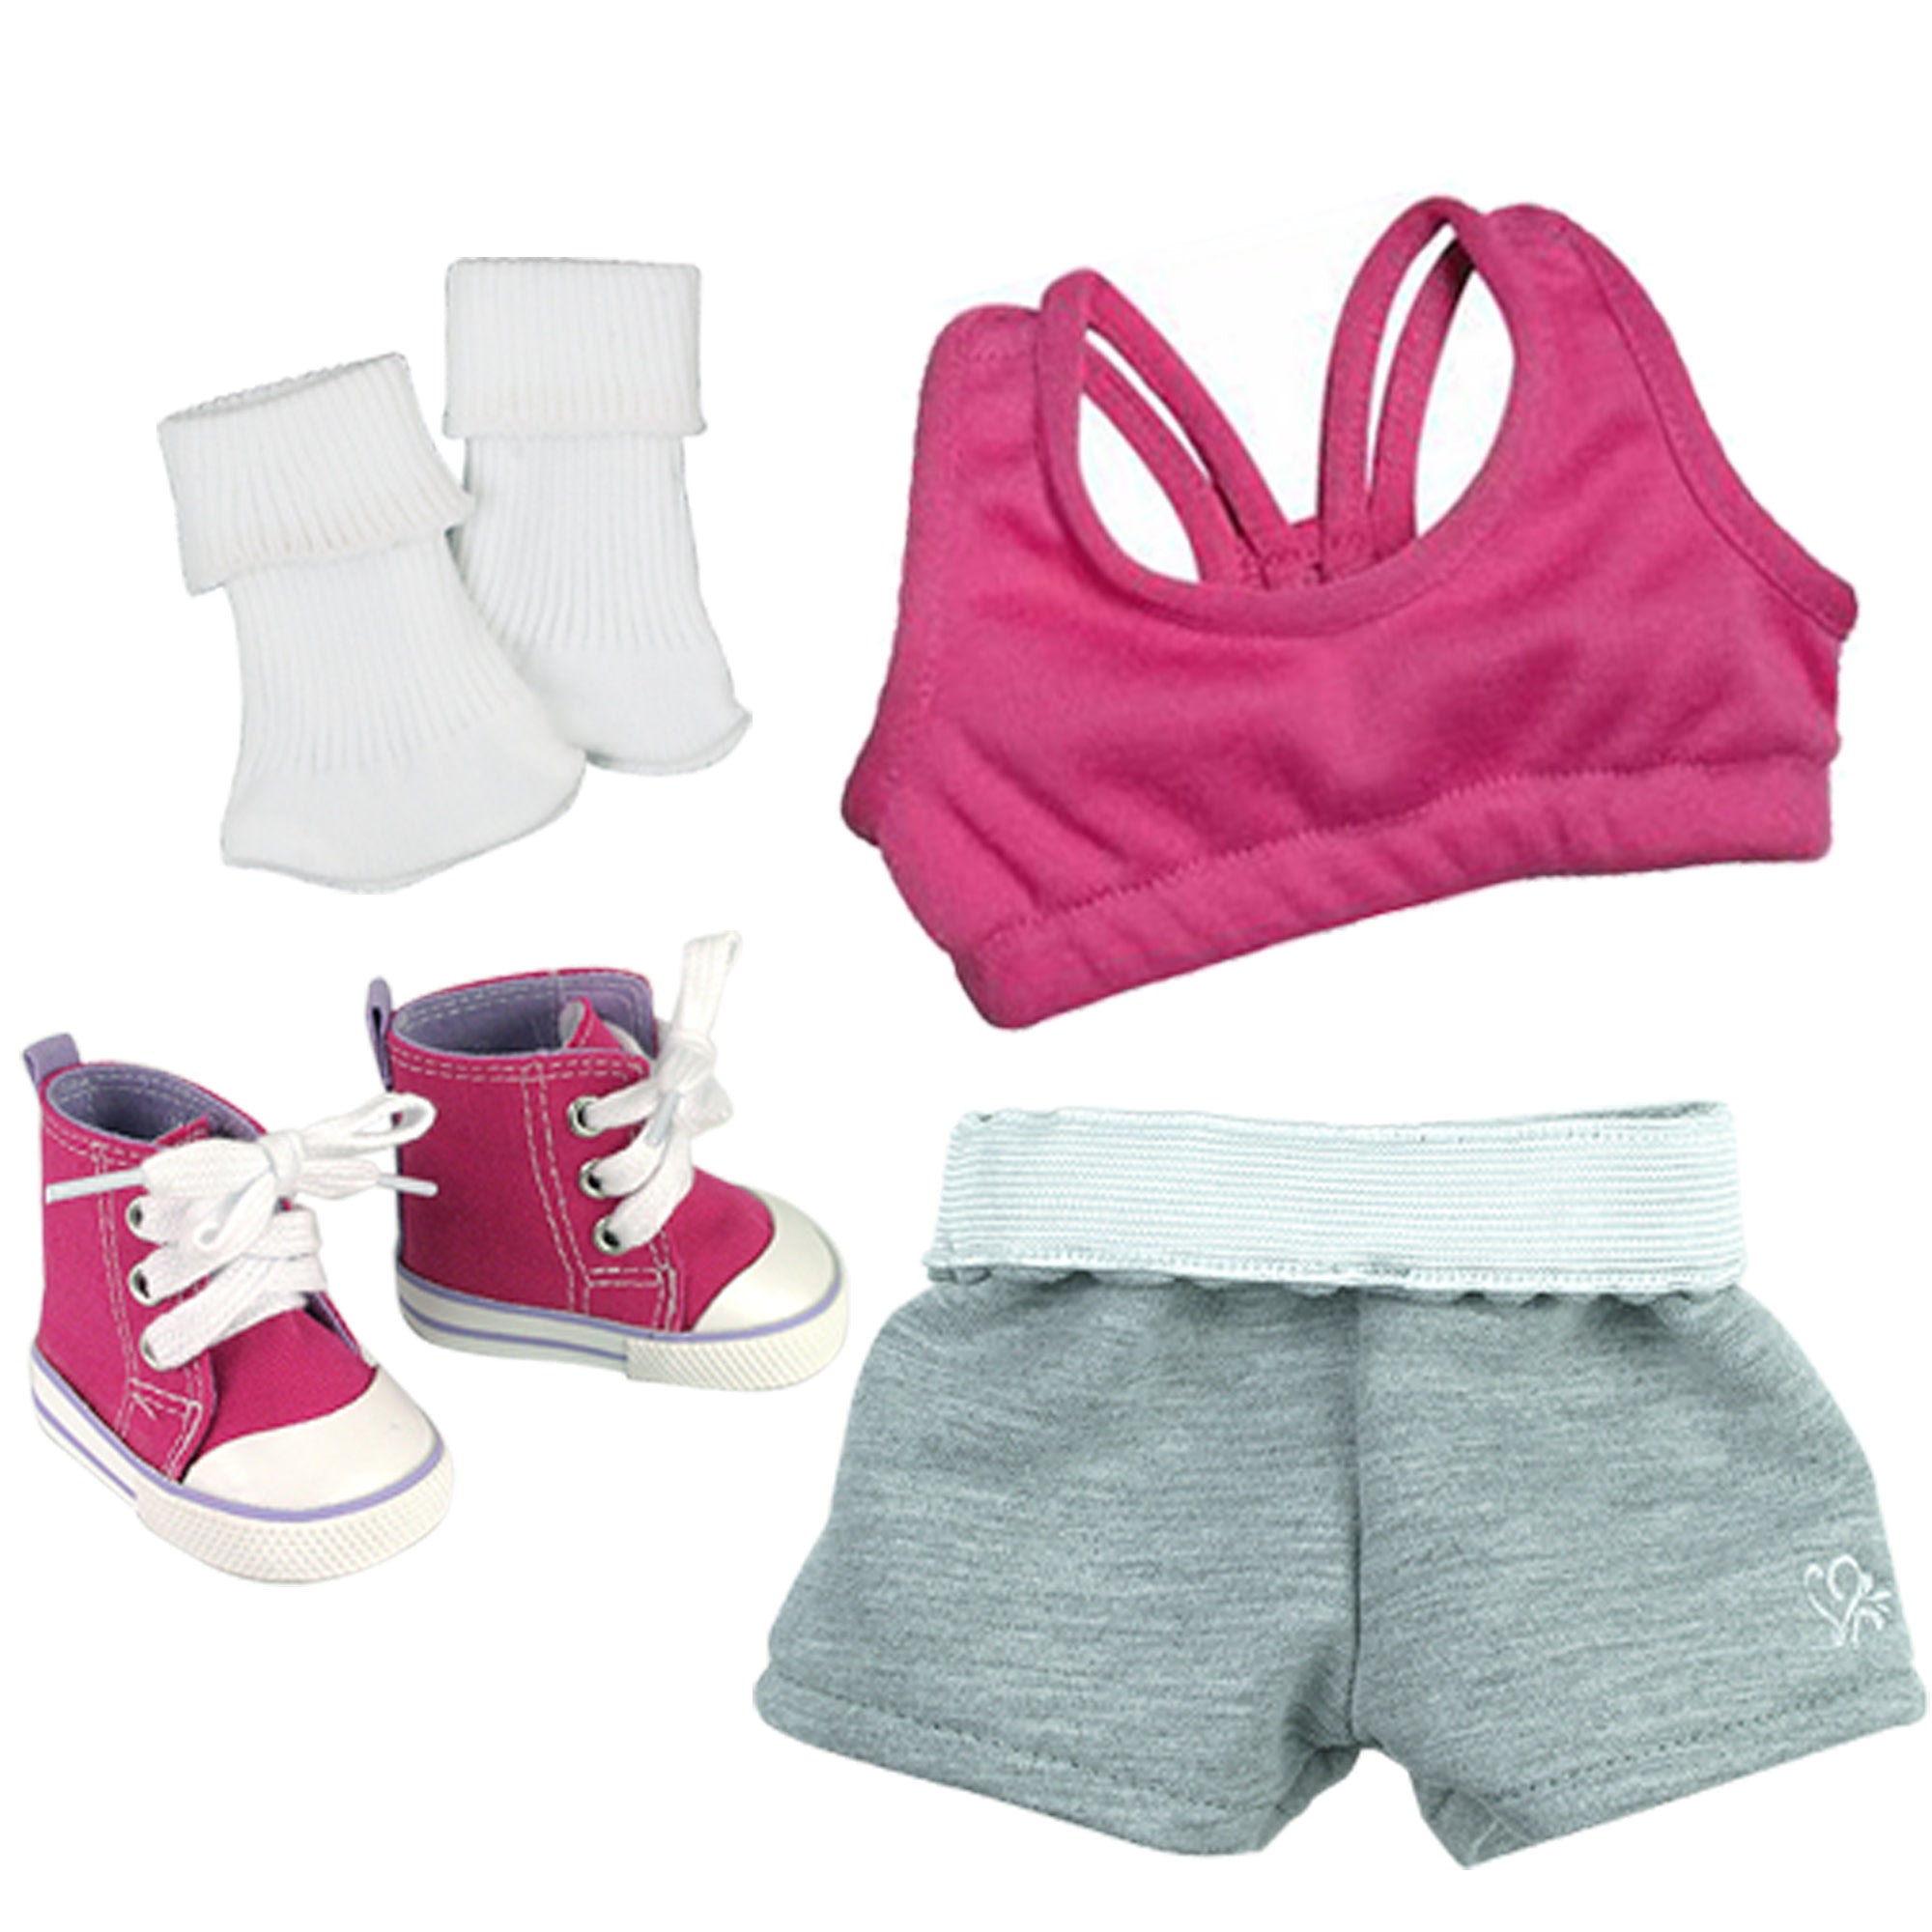 Sophia's Sports Set with Bra, Shorts, Socks and Hi-Top Sneakers for 18" Dolls, Pink/Gray